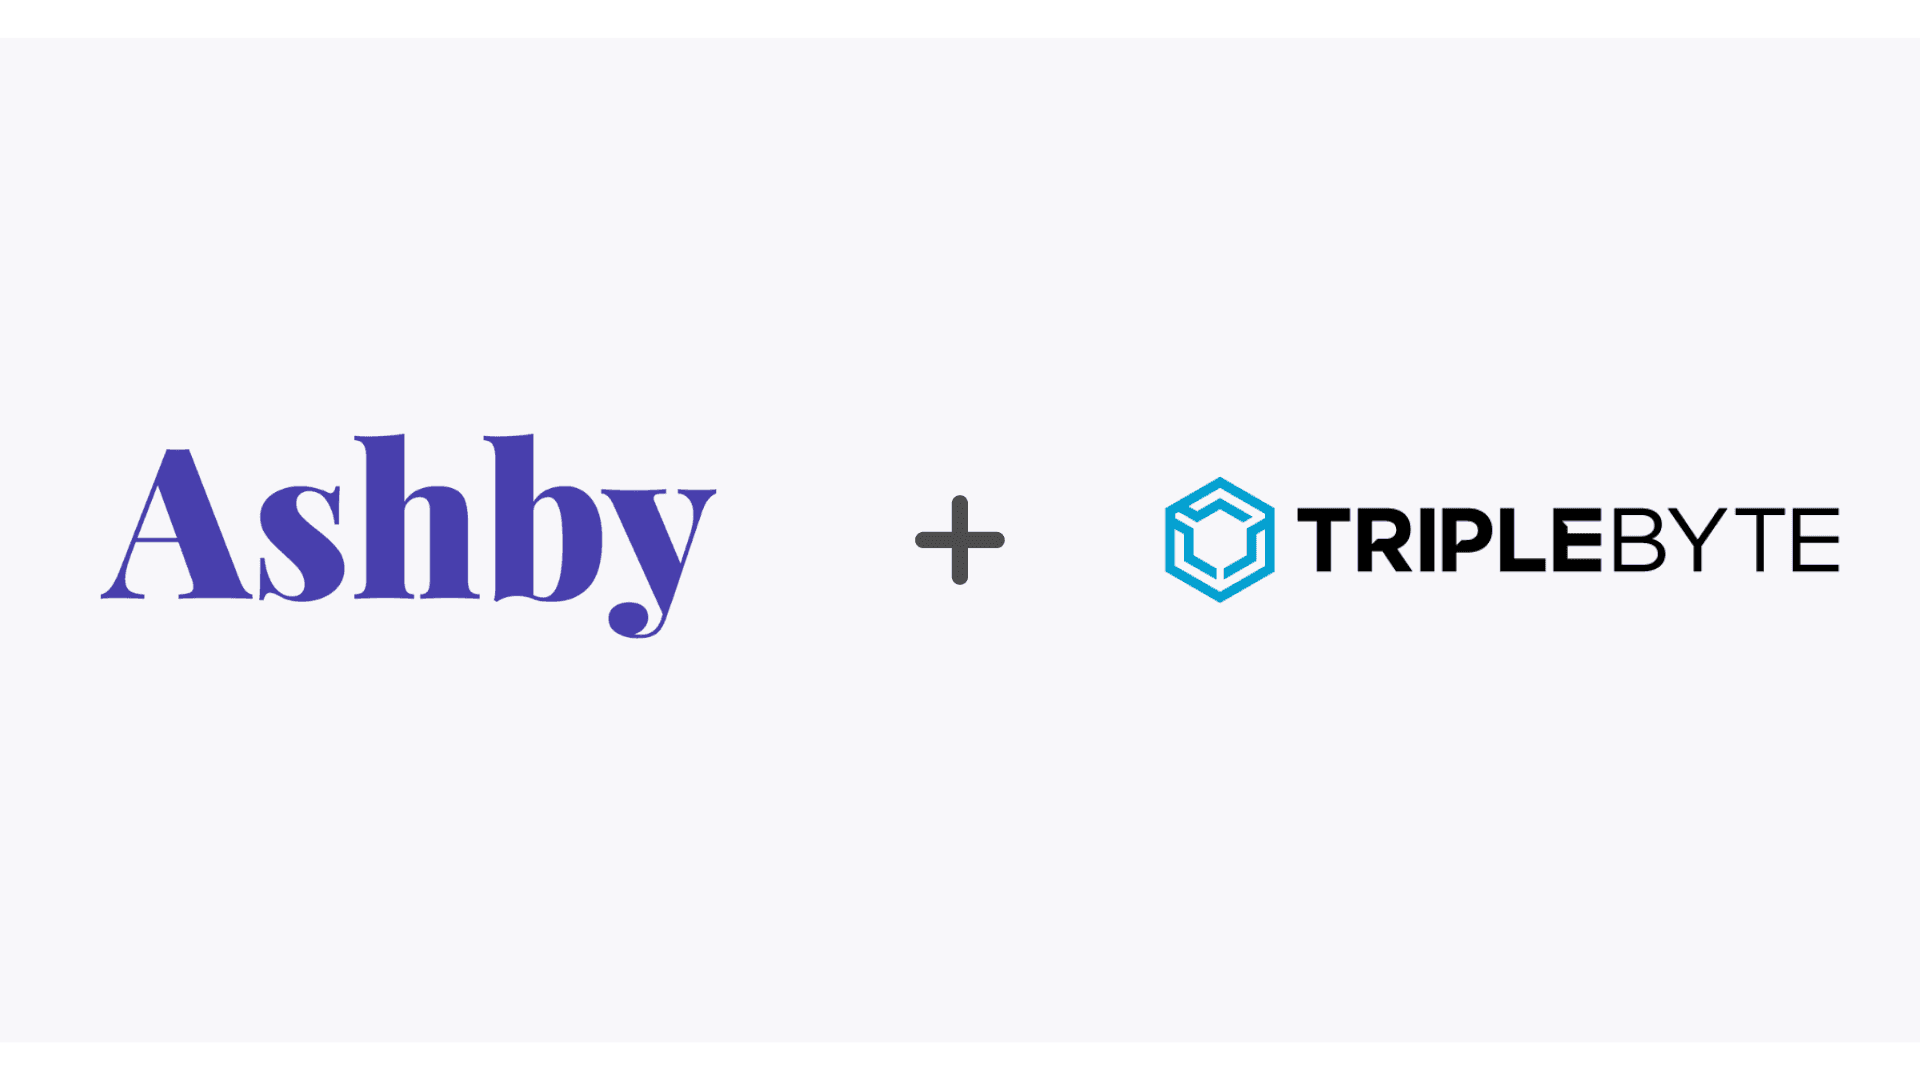 Ashby Has Partnered with Triplebyte